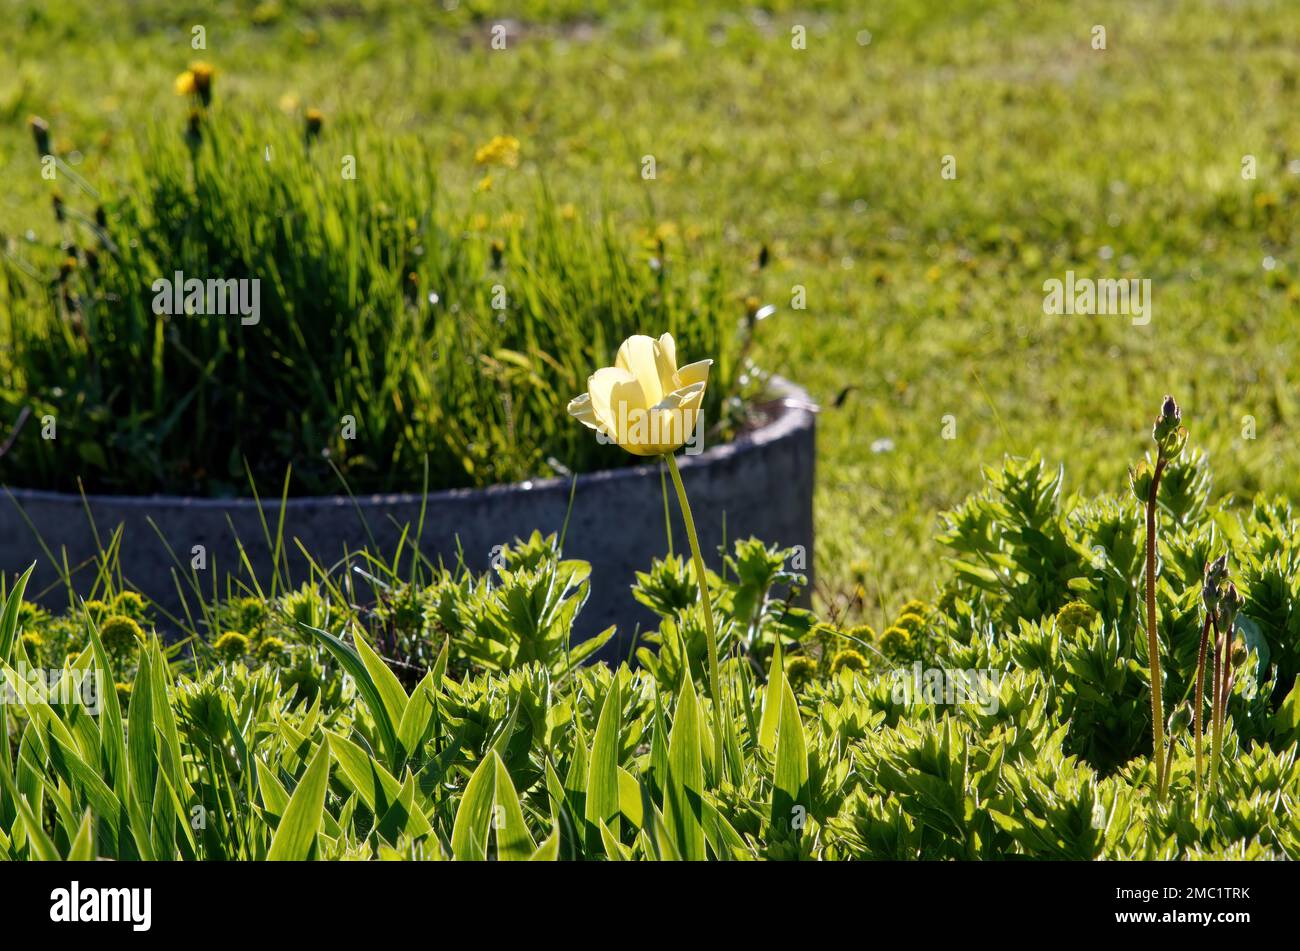 lonely yellow tulip in the garden, spring Stock Photo